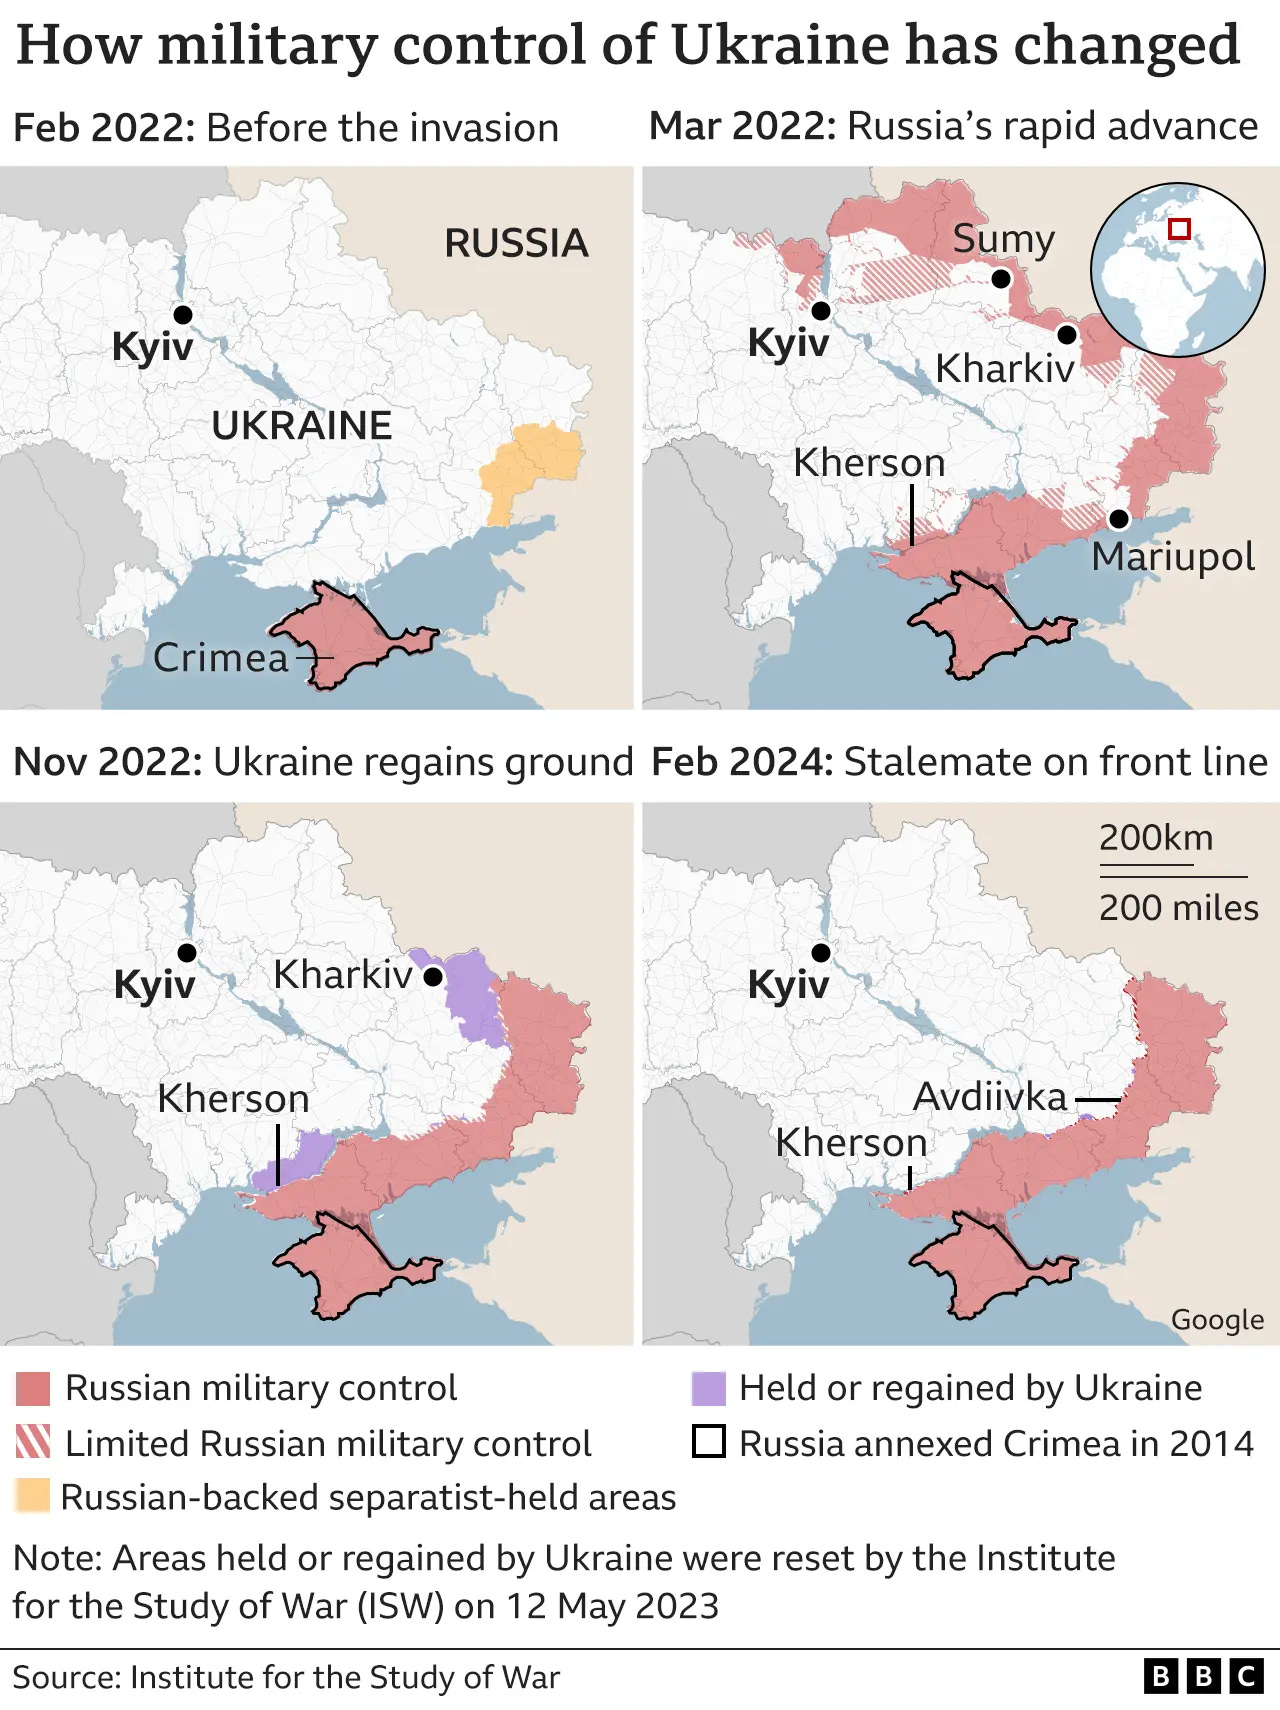 Four maps showing how the situation has changed on the ground since Russia's invasion.